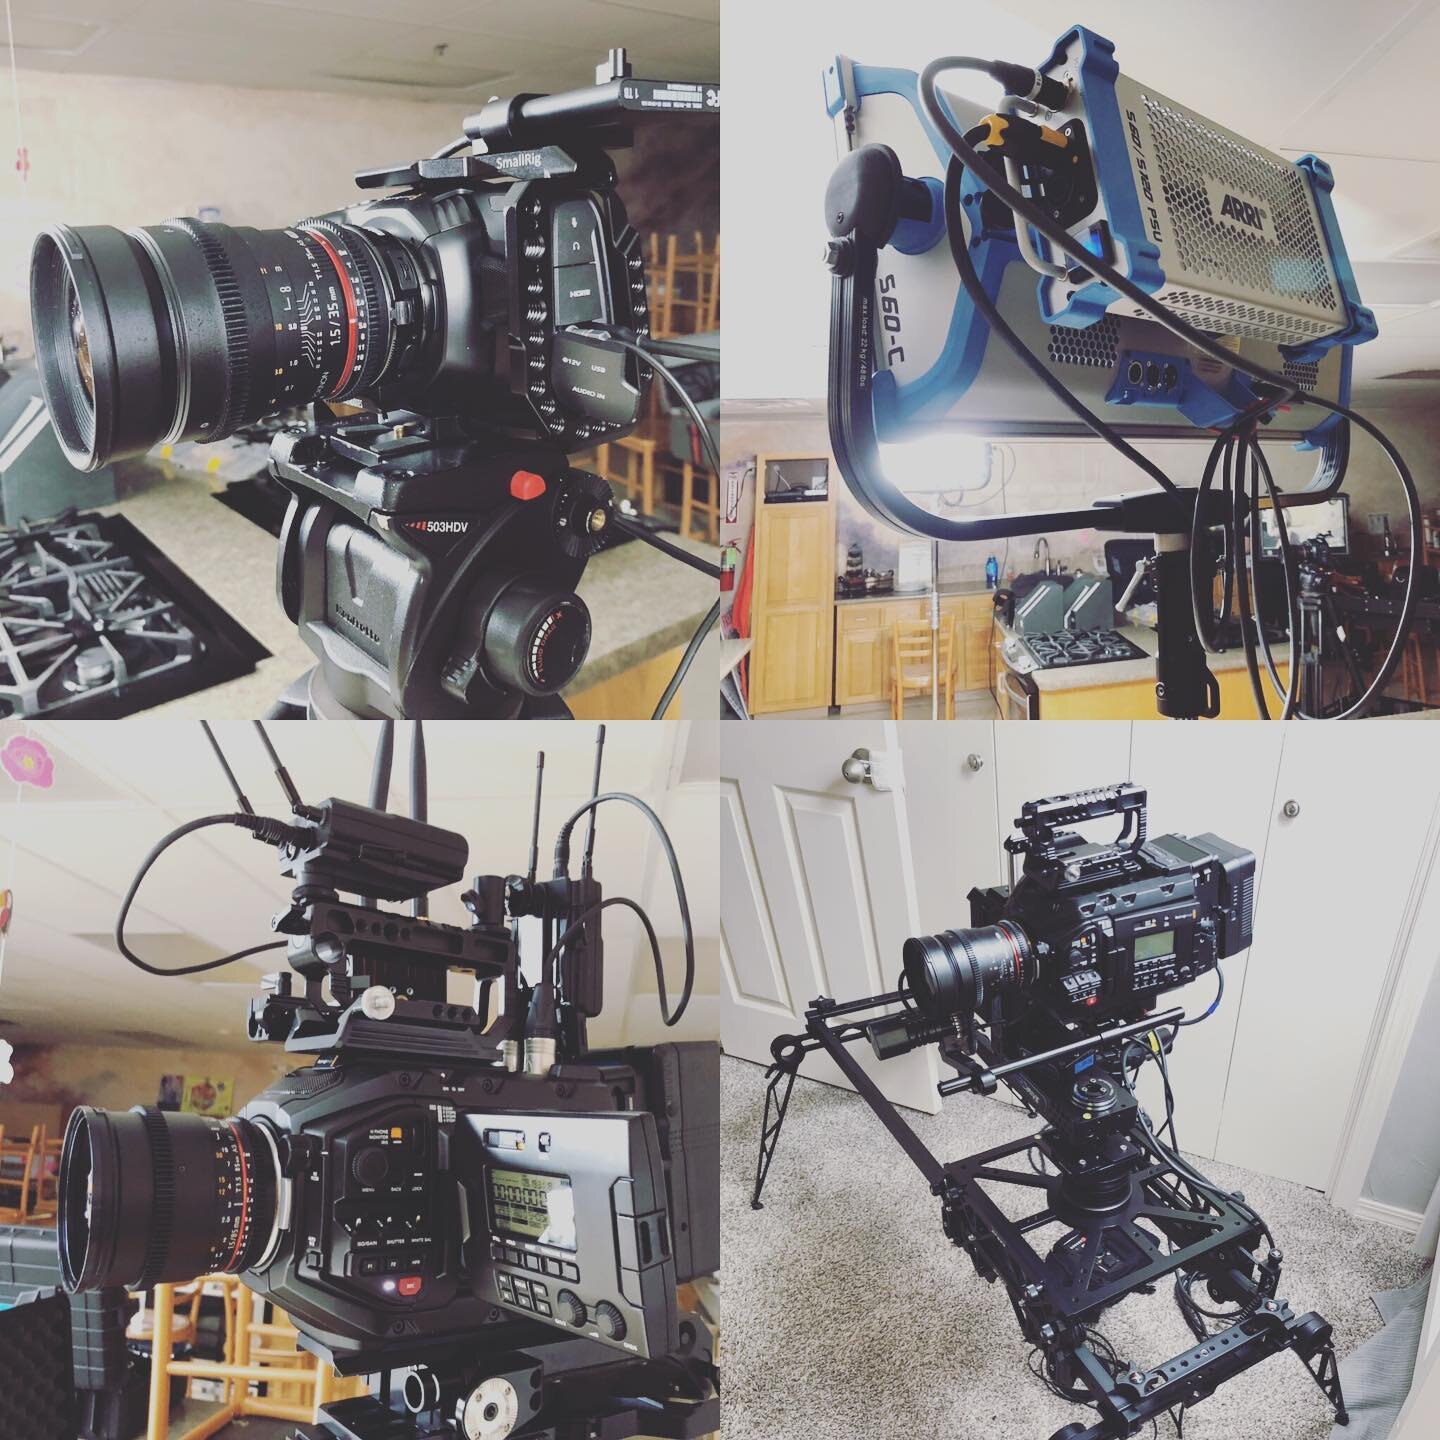 Haven&rsquo;t posted a #bts series in a while so why not. Here&rsquo;s a look at some of the recent #filmmaking sets and gear we&rsquo;ve been running. .
.
.
.
.
 #arriskypanel #ursaminipro #kesslercrane #entrepreneurlifestyle #healthcarevideoshoot #